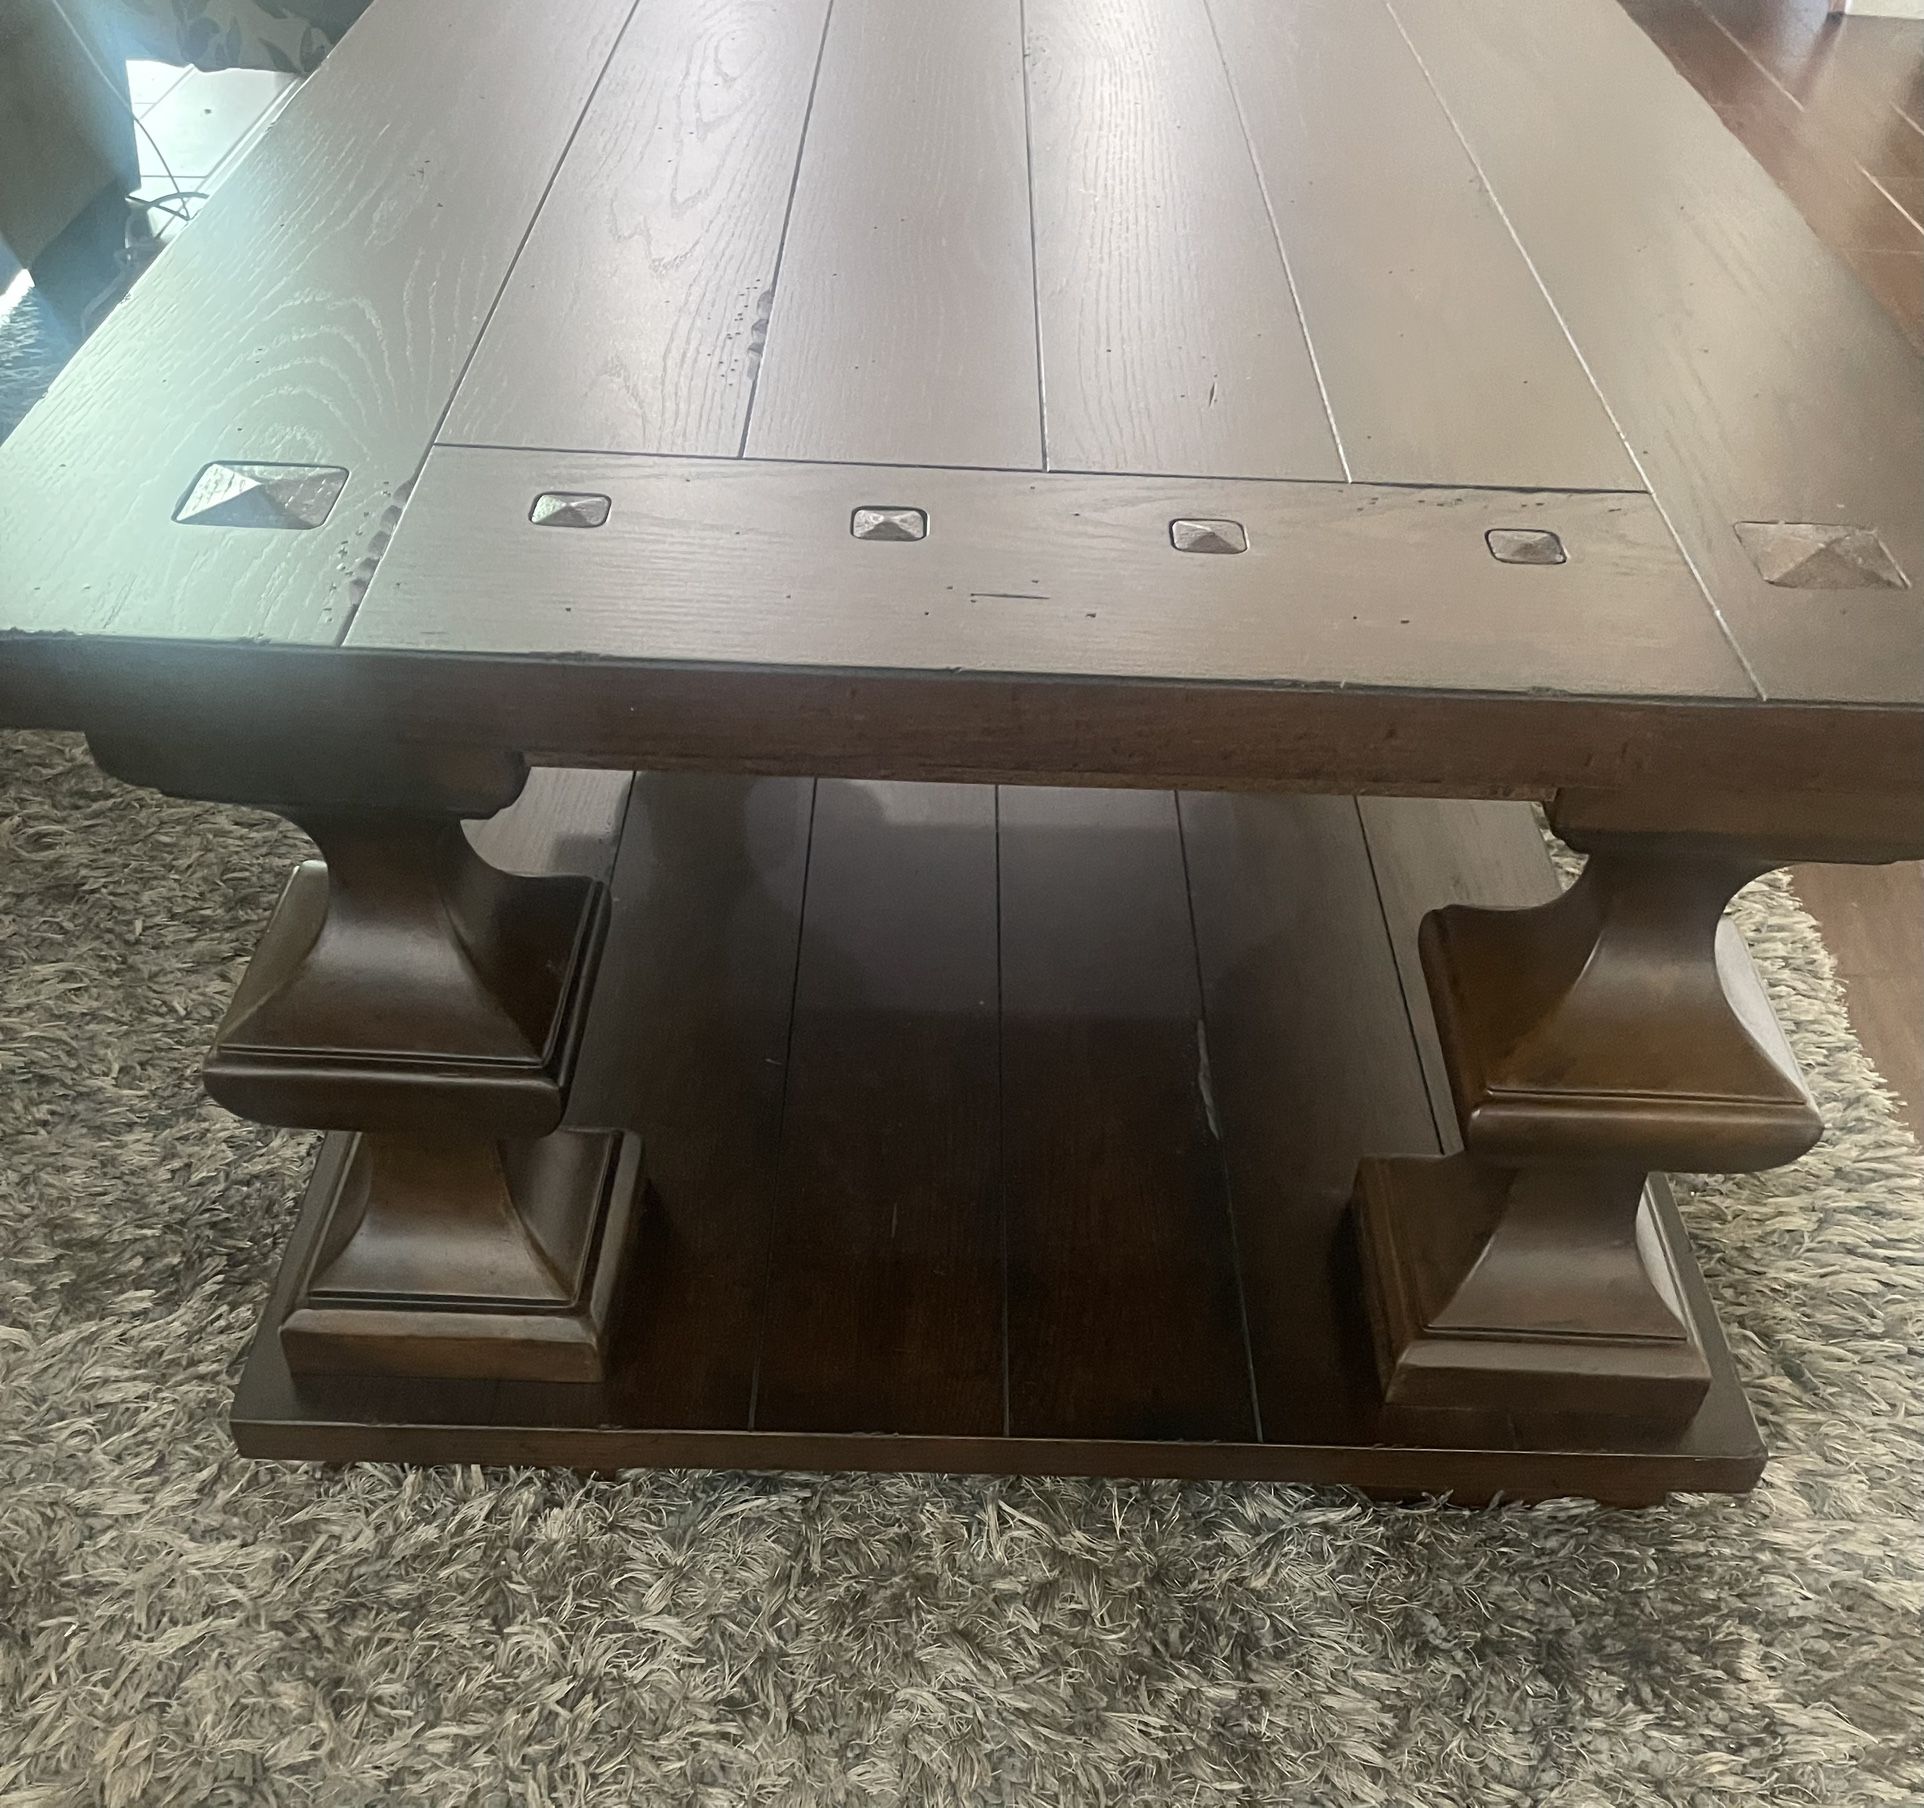 BRAND NEW IN BOX TOP QUALITY COFFEE TABLE 